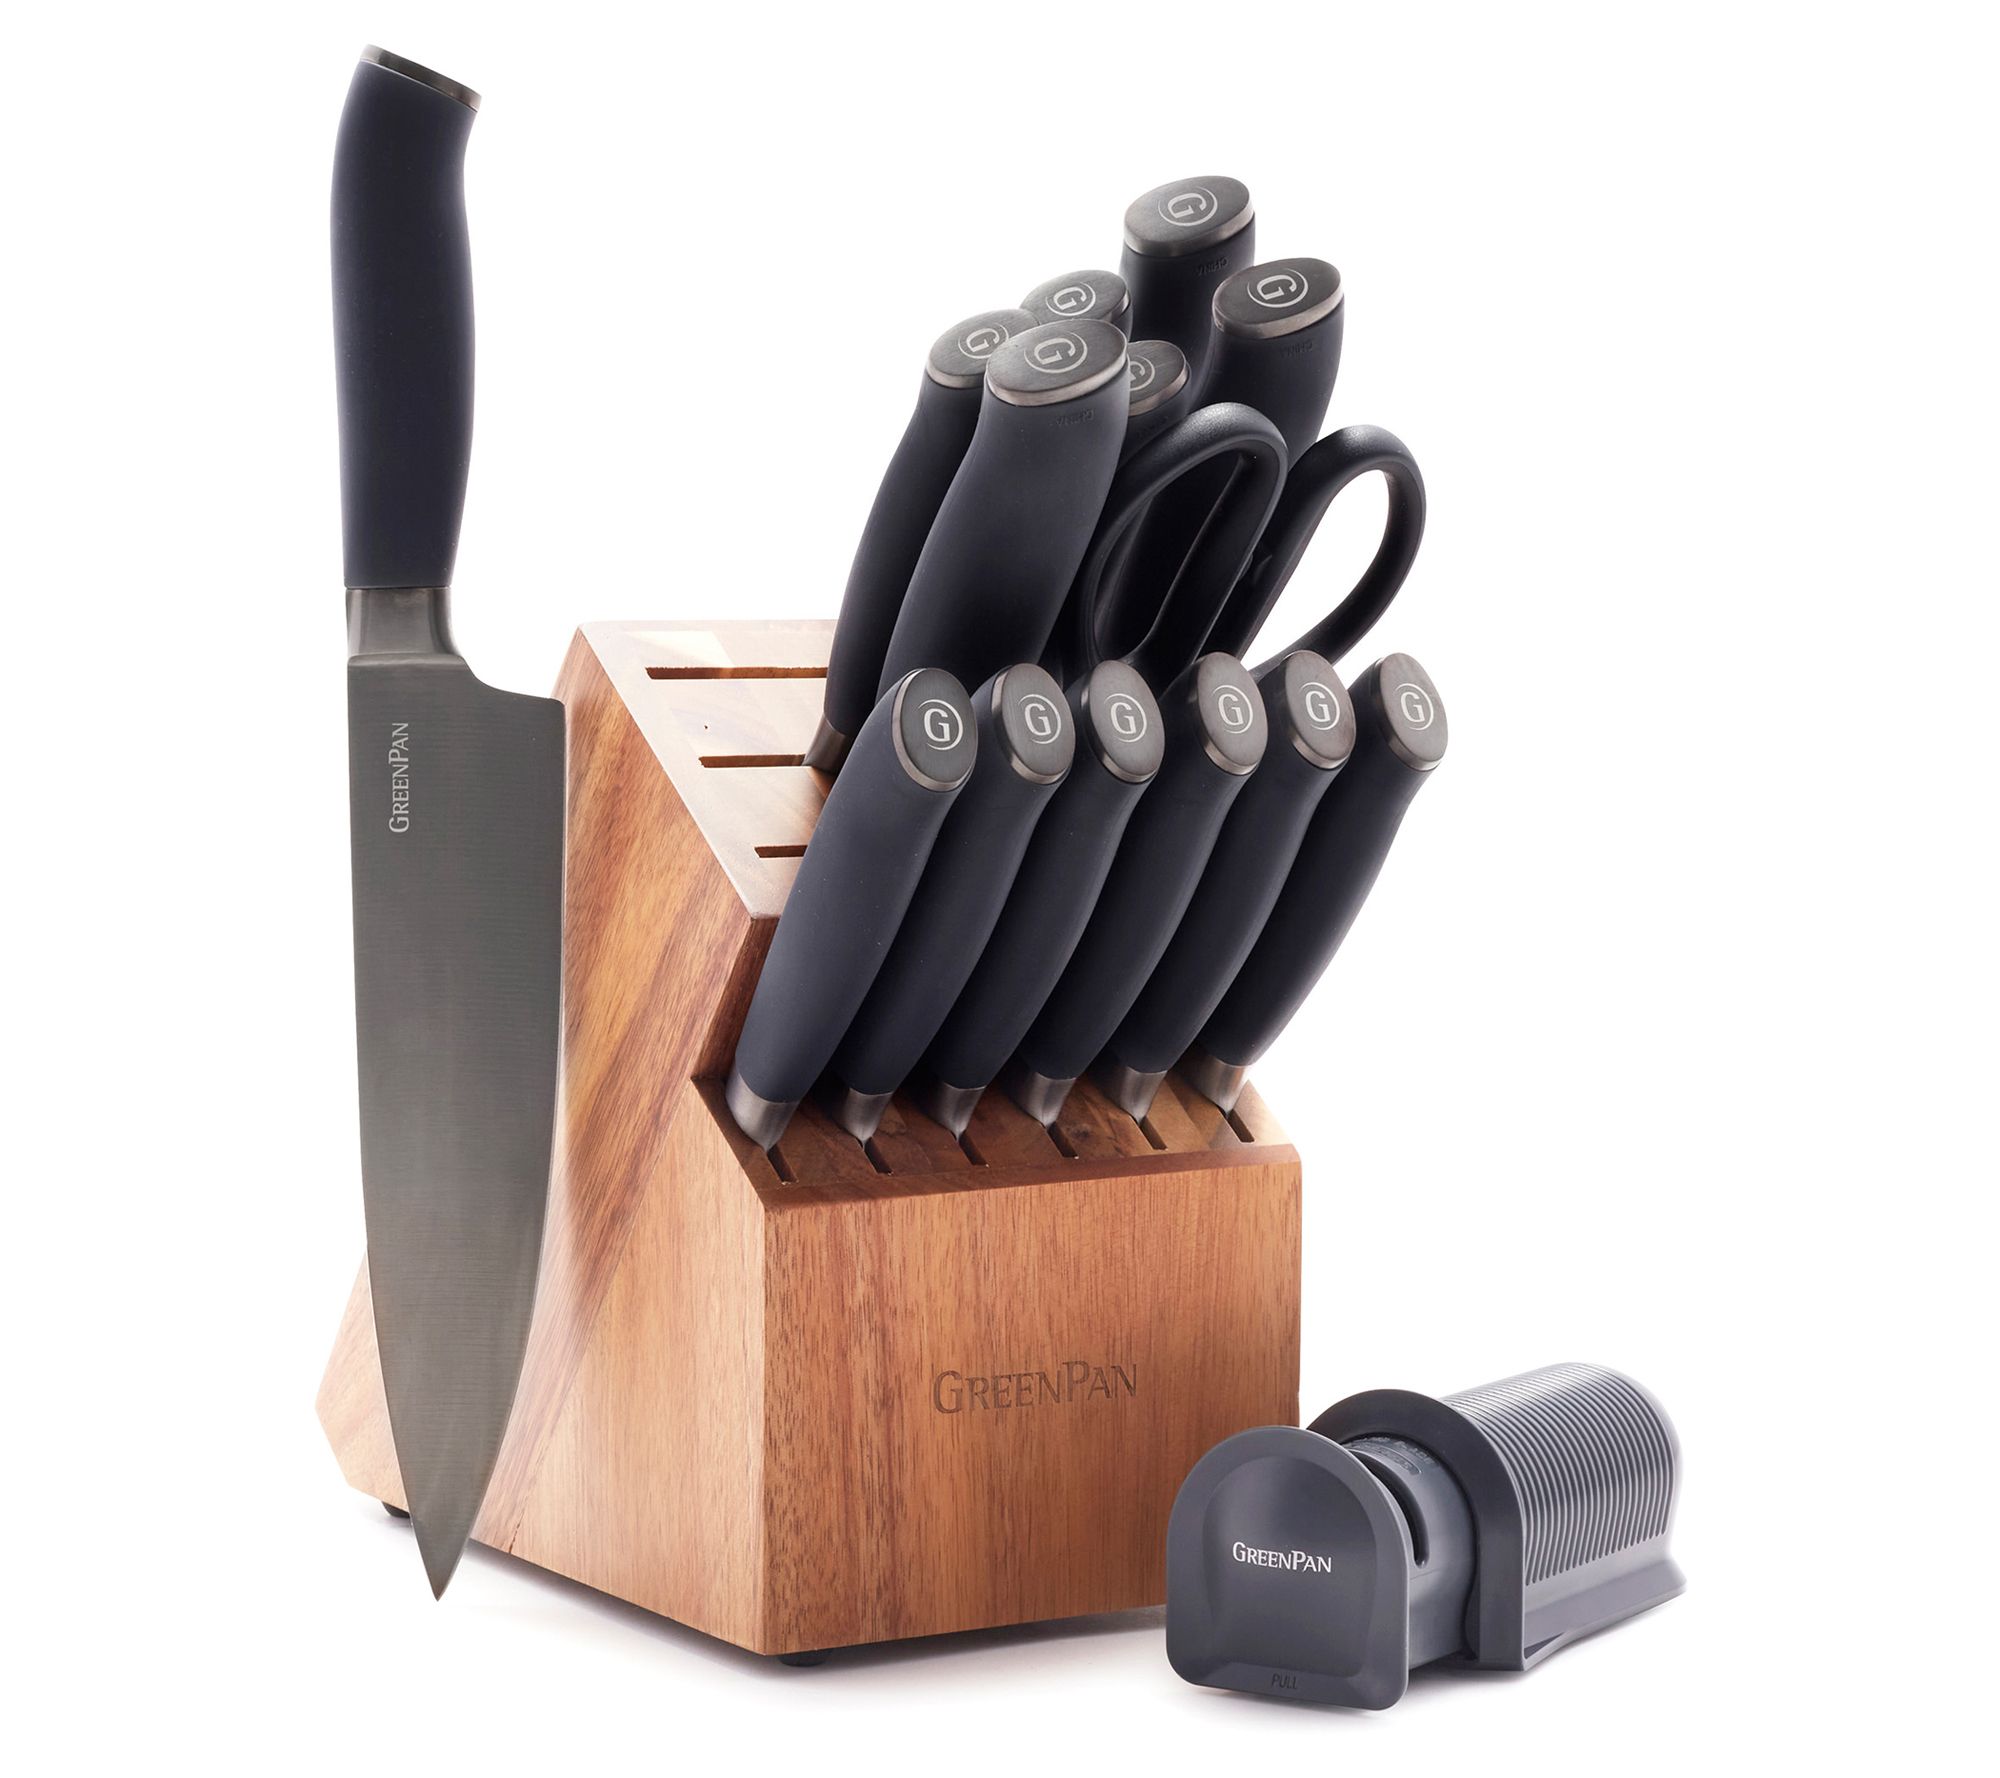 This self-sharpening knife set from Calphalon is over $90 off at